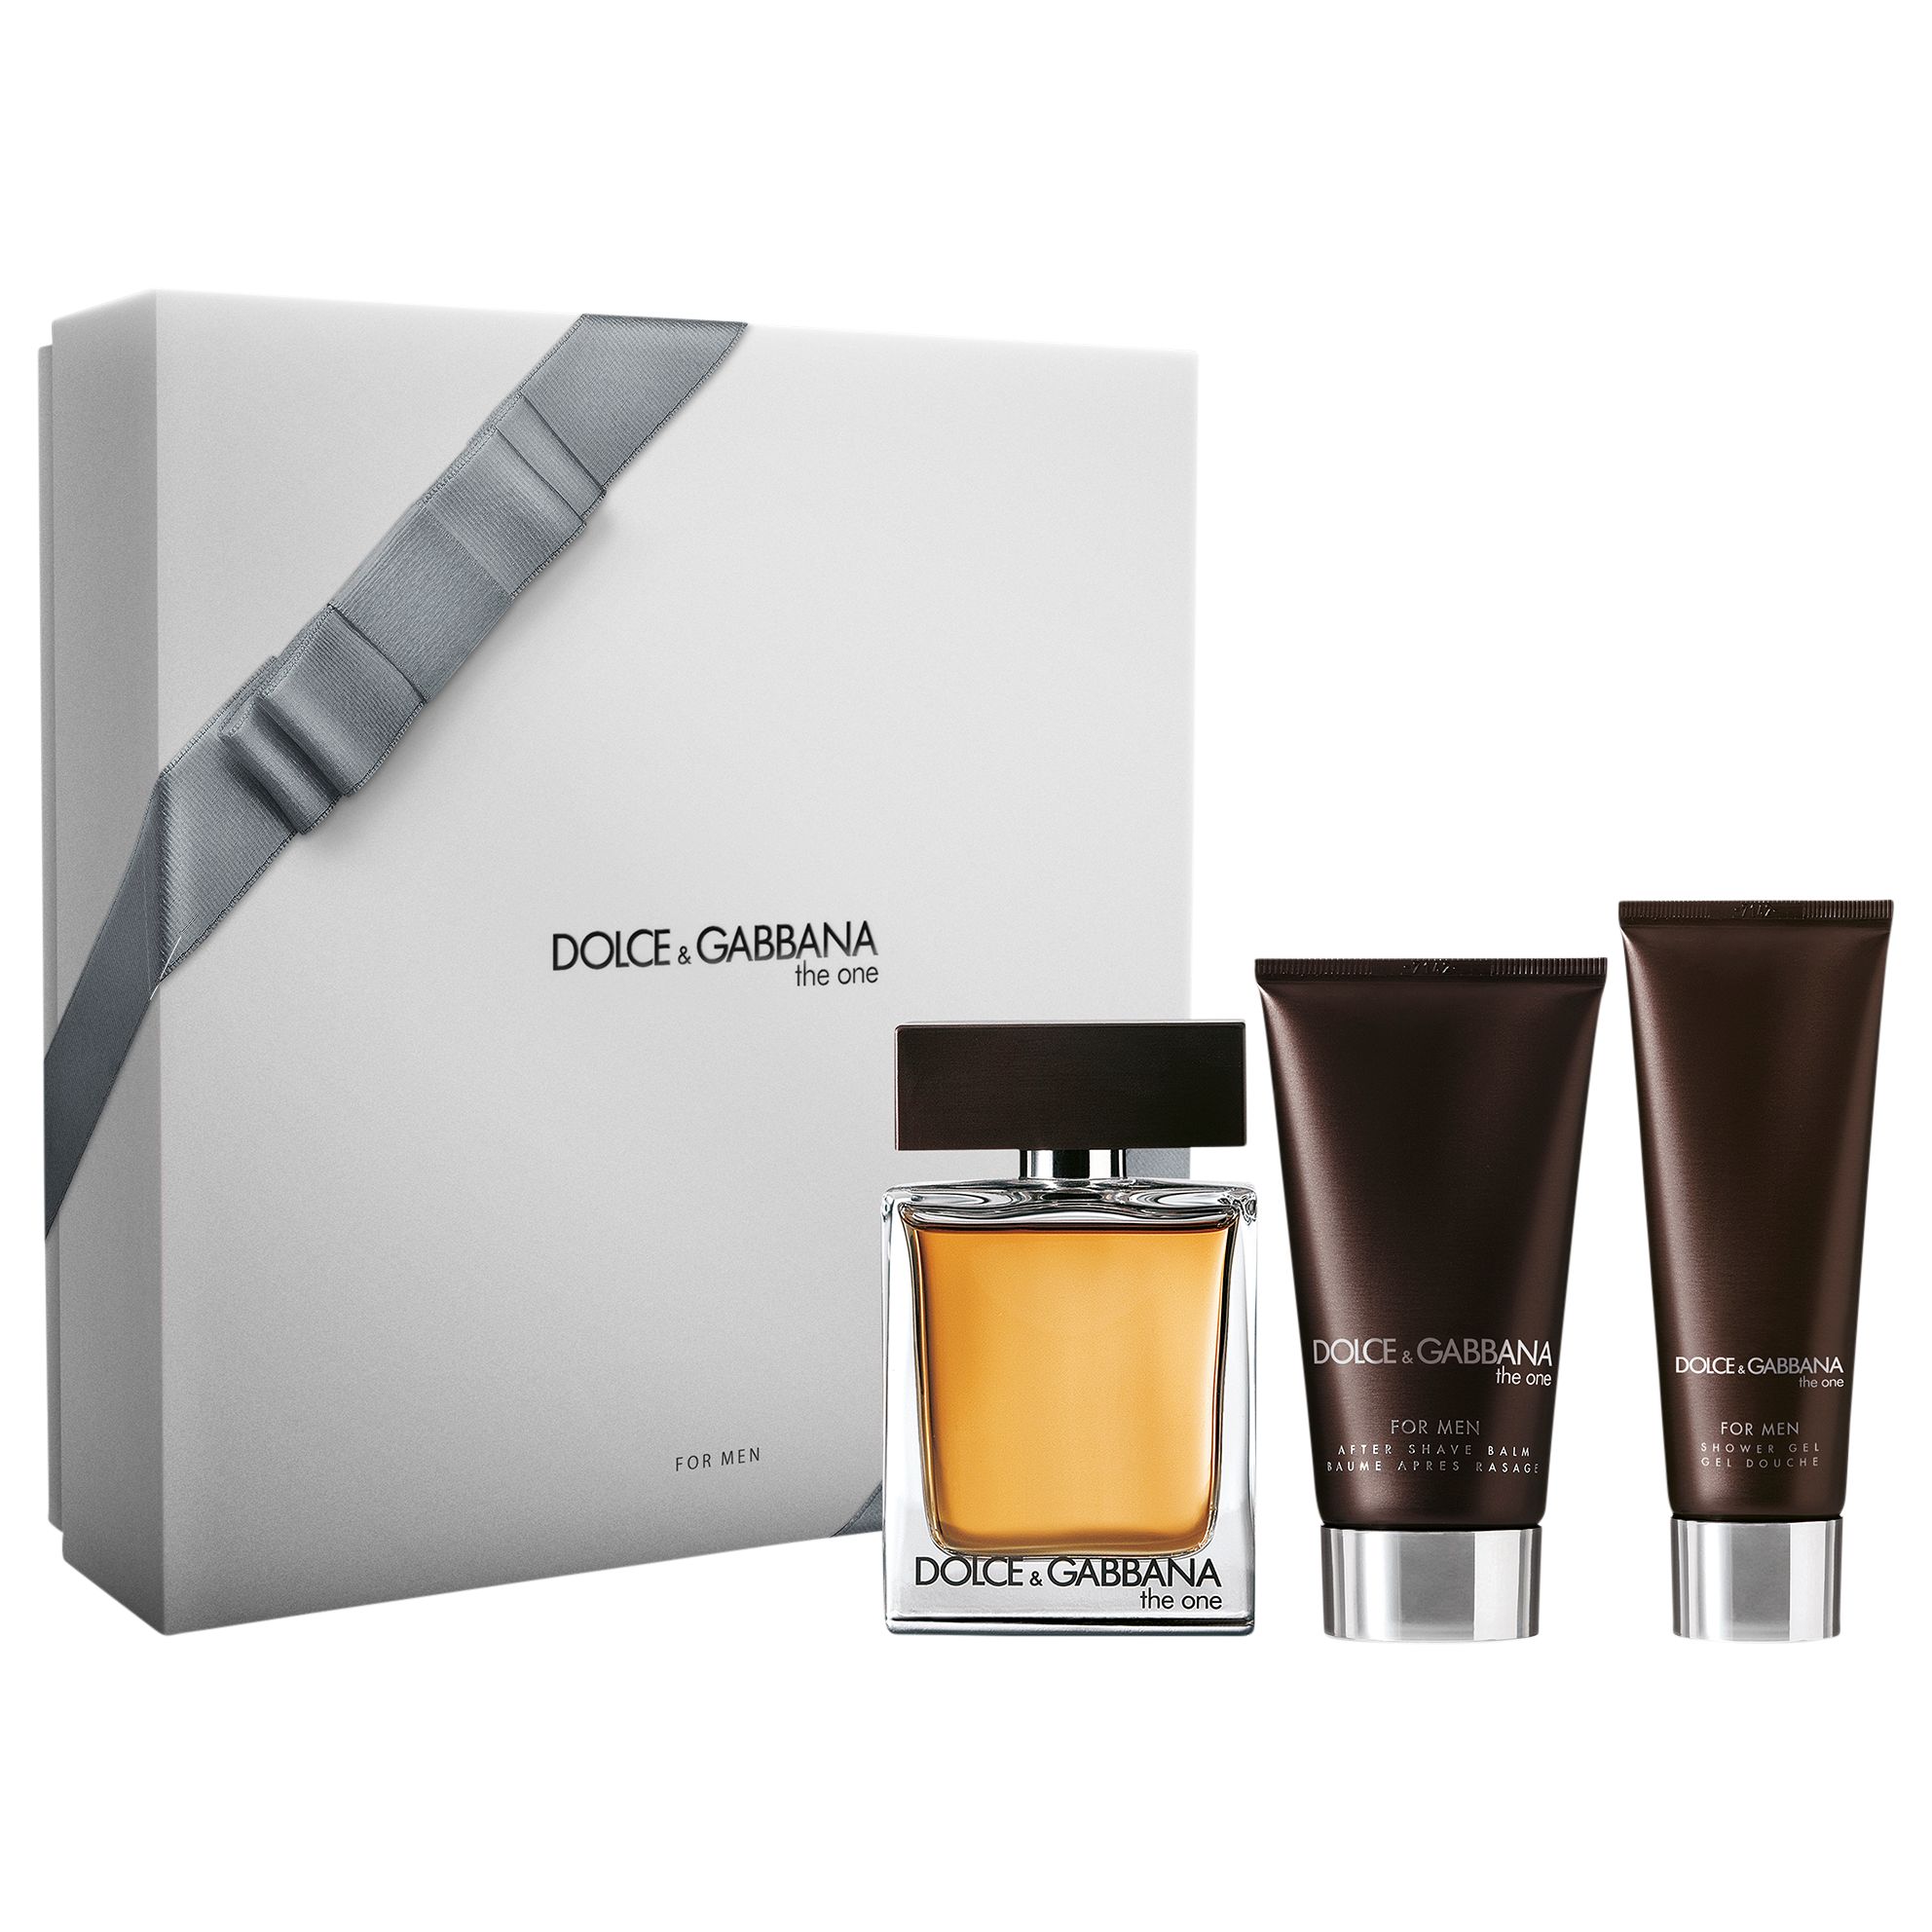 dolce and gabbana the one woman gift set